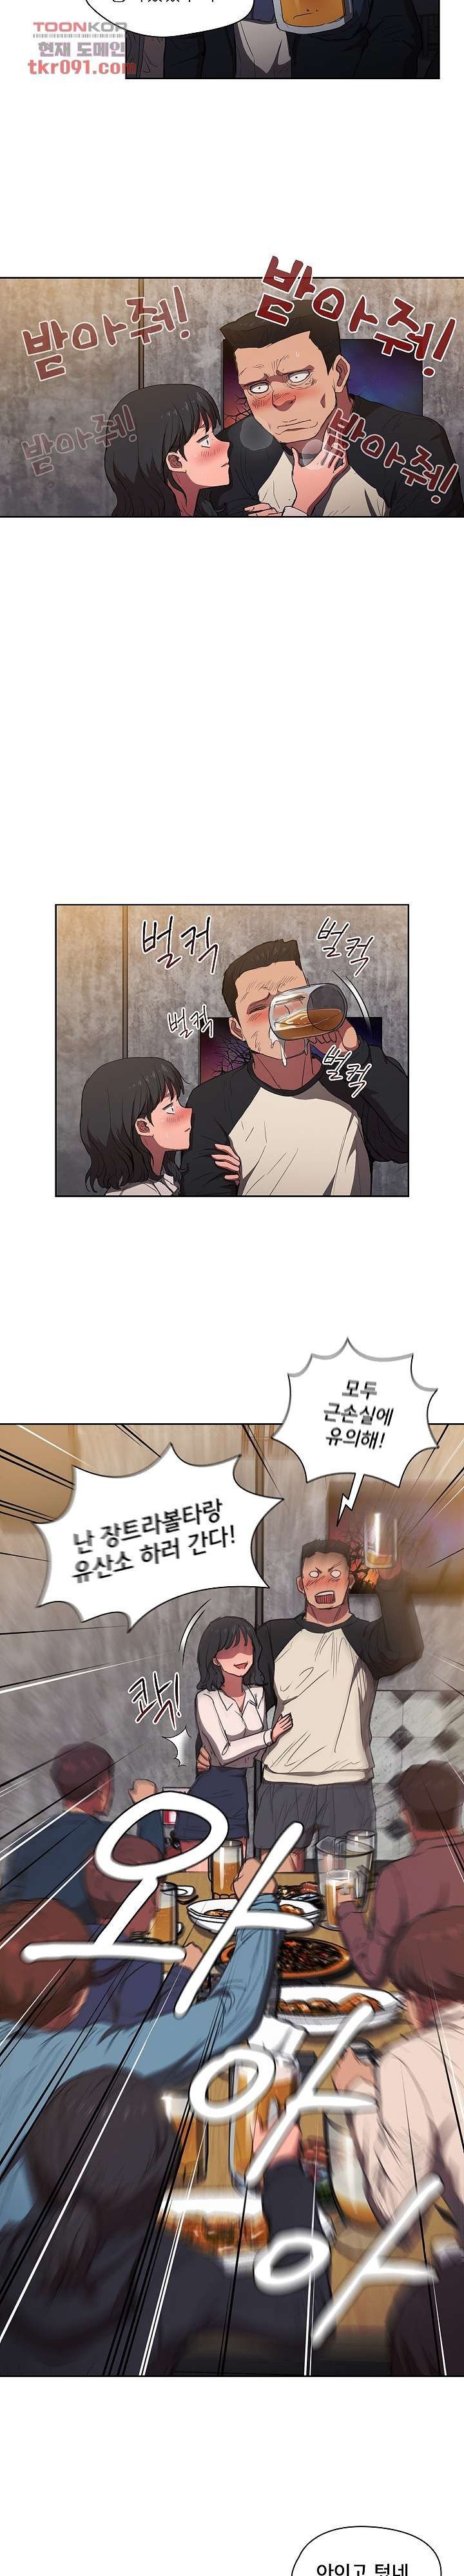 how-about-getting-lost-raw-chap-36-17